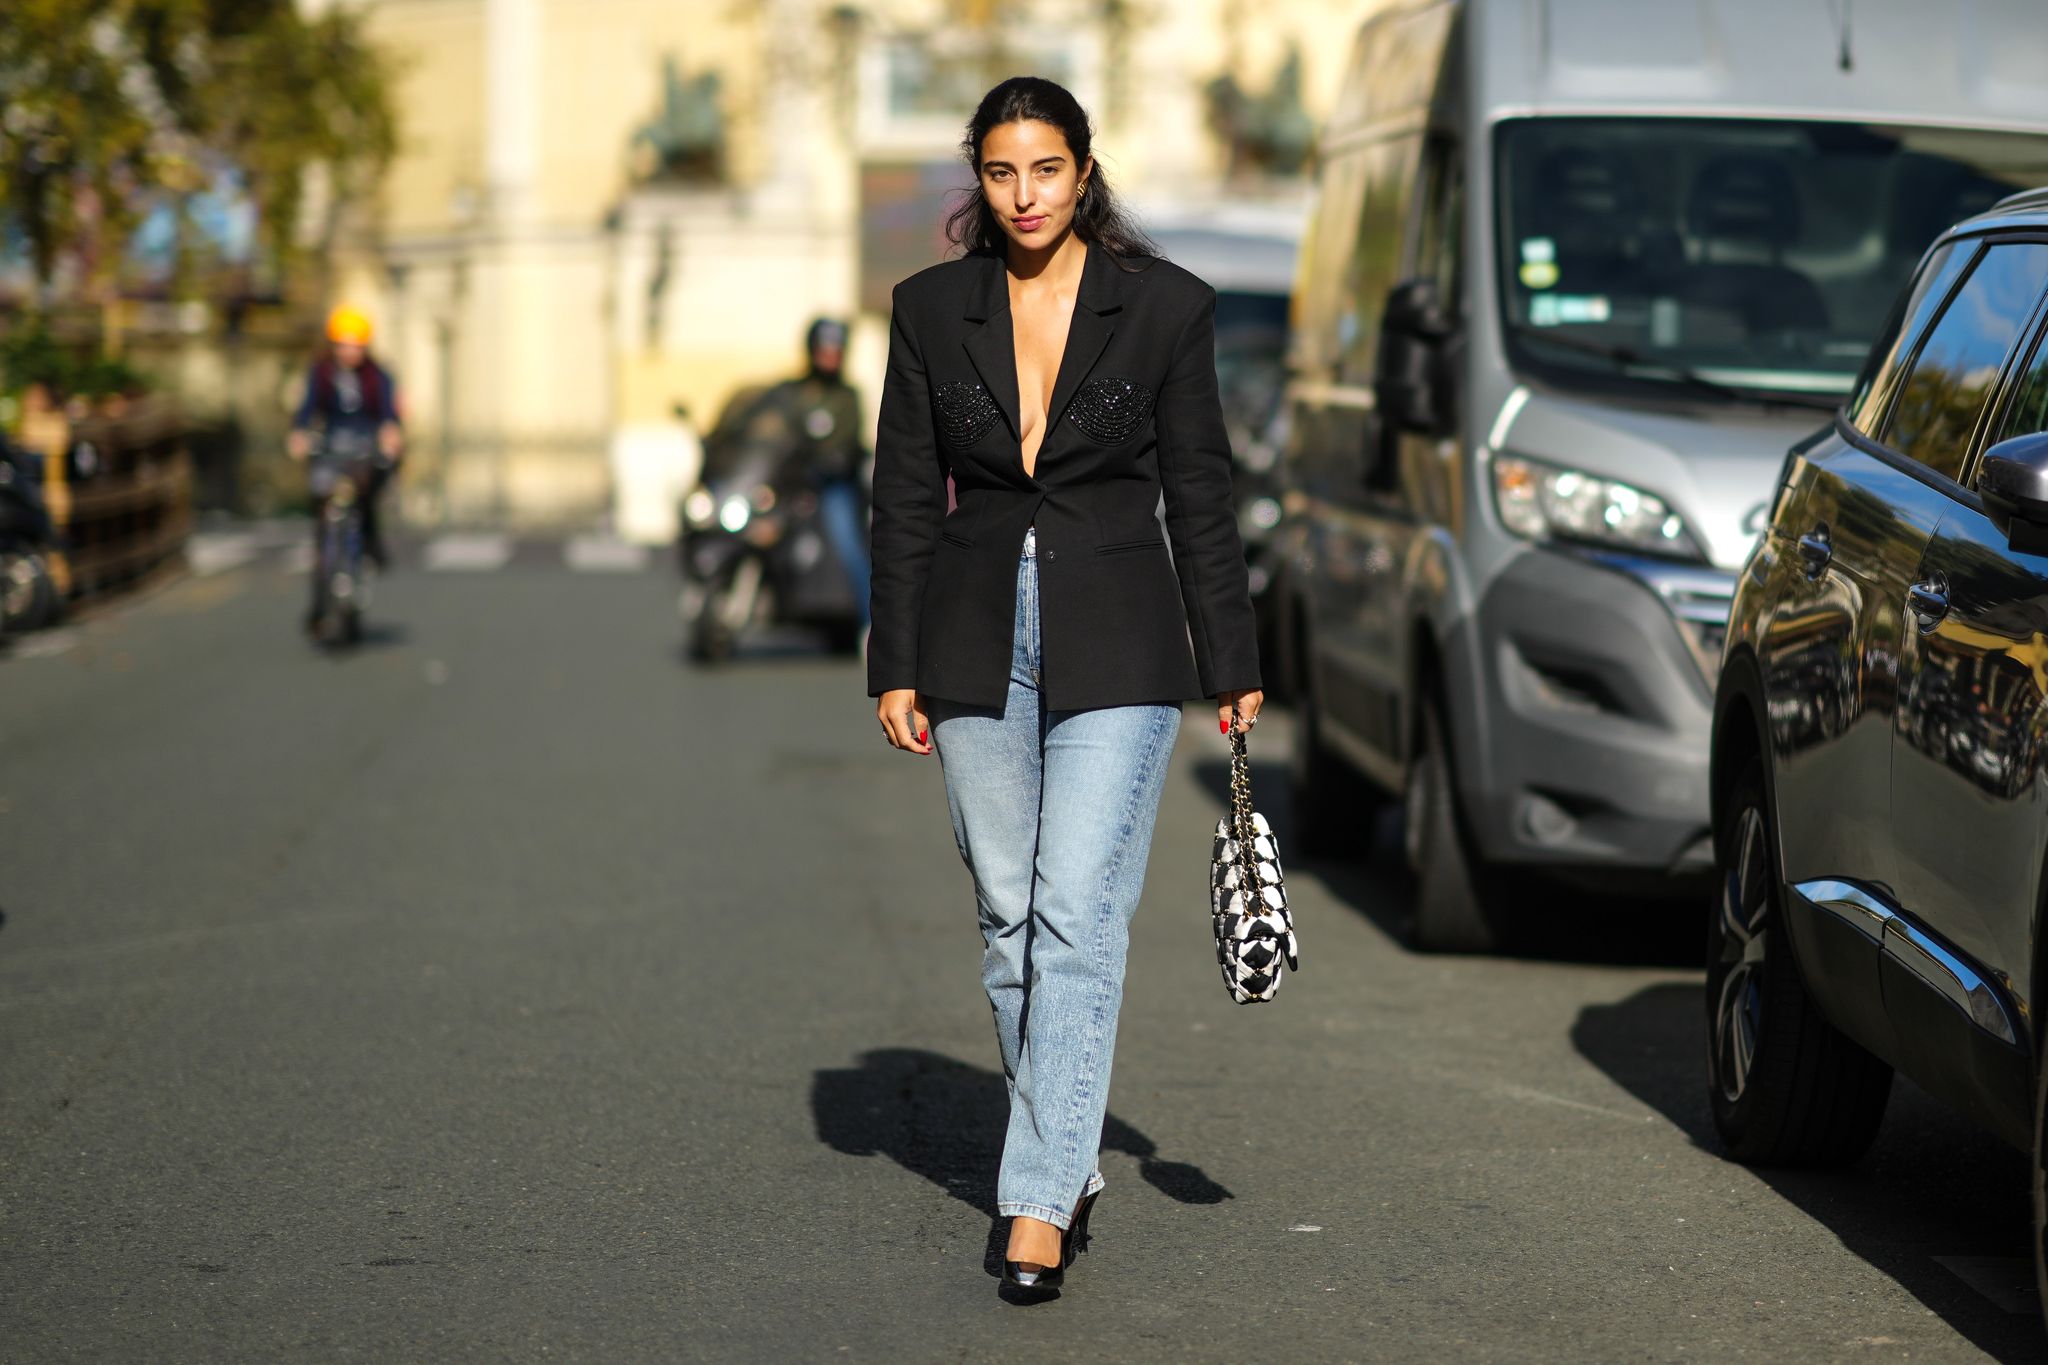 Straight-Leg Jeans Are Having Their Moment In The Spotlight